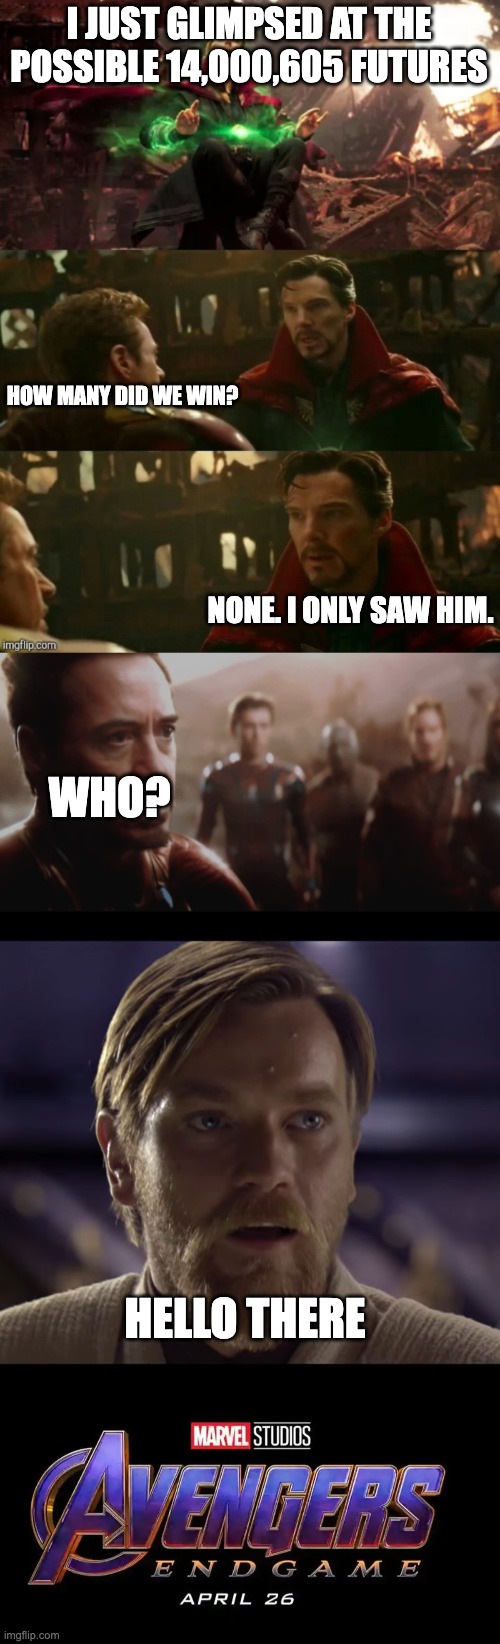 I JUST GLIMPSED AT THE POSSIBLE 14,000,605 FUTURES; HOW MANY DID WE WIN? NONE. I ONLY SAW HIM. WHO? HELLO THERE | image tagged in avengers infinity war - dr strange futures,i saw 14 000 605 futures,hello there | made w/ Imgflip meme maker